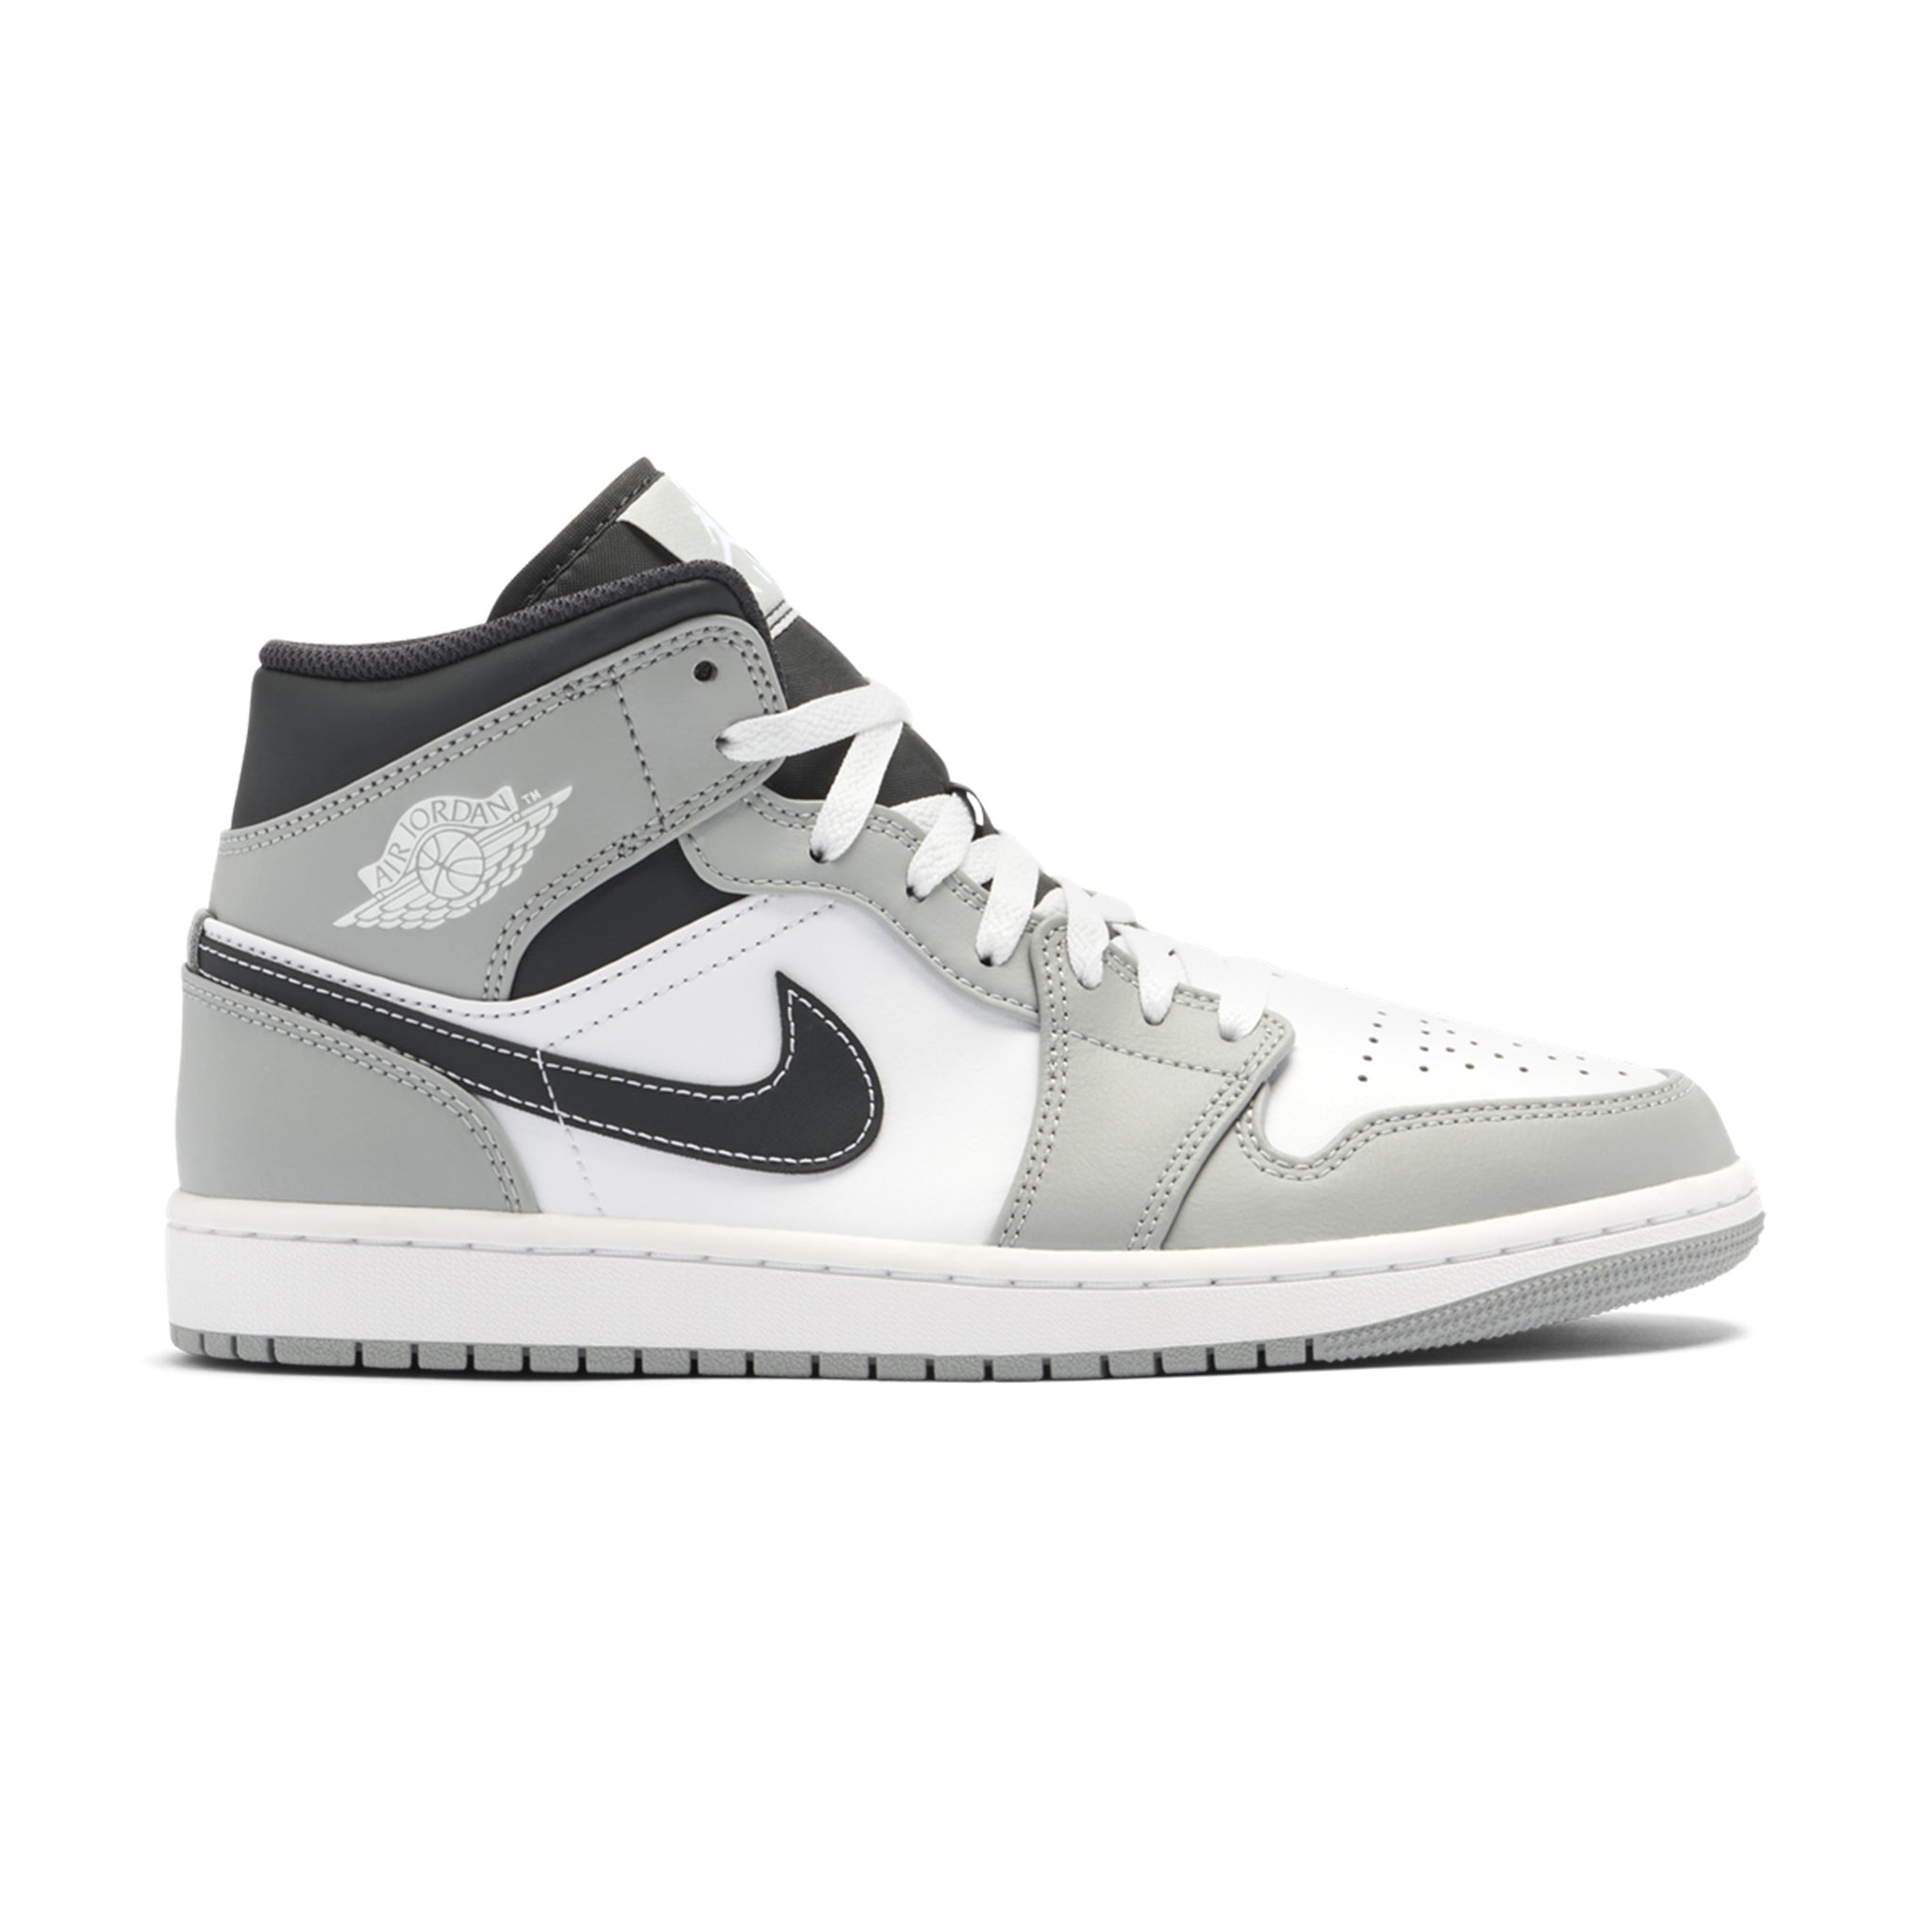 Front view of Air Jordan 1 Mid Light Smoke Grey Anthracite (GS) 554725-078